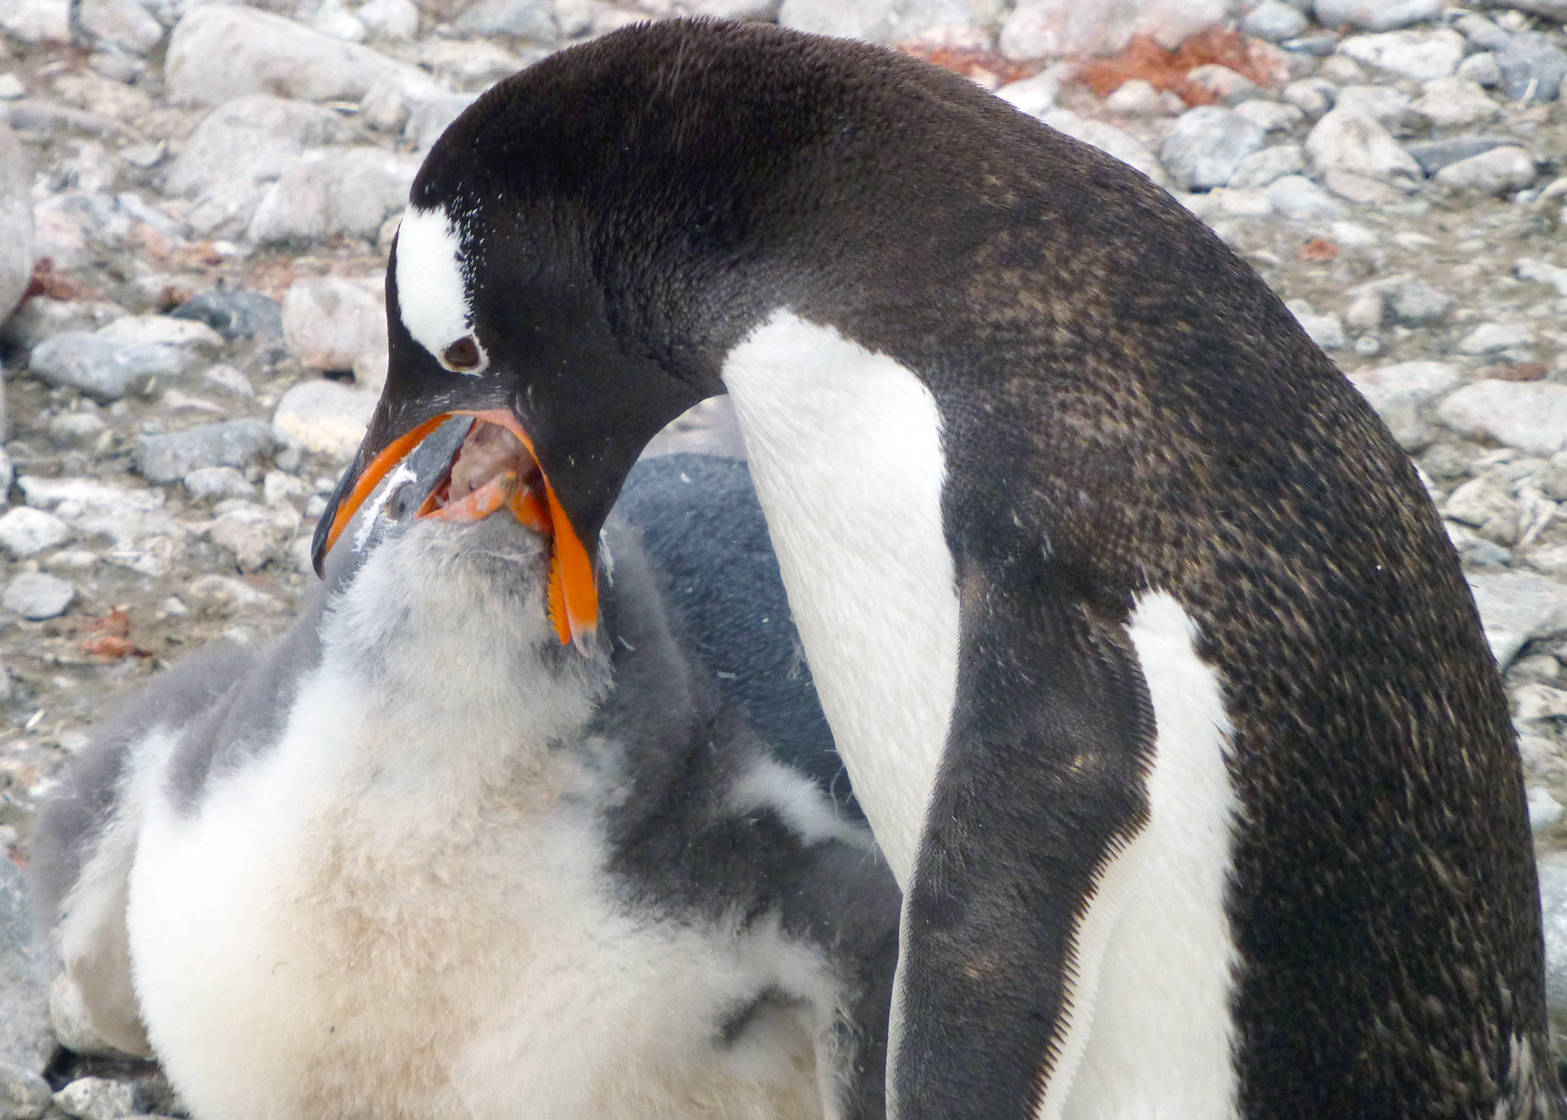 A gentoo penguin feeds its chick a diet of krill. (Photo provided by Sue Mauger)